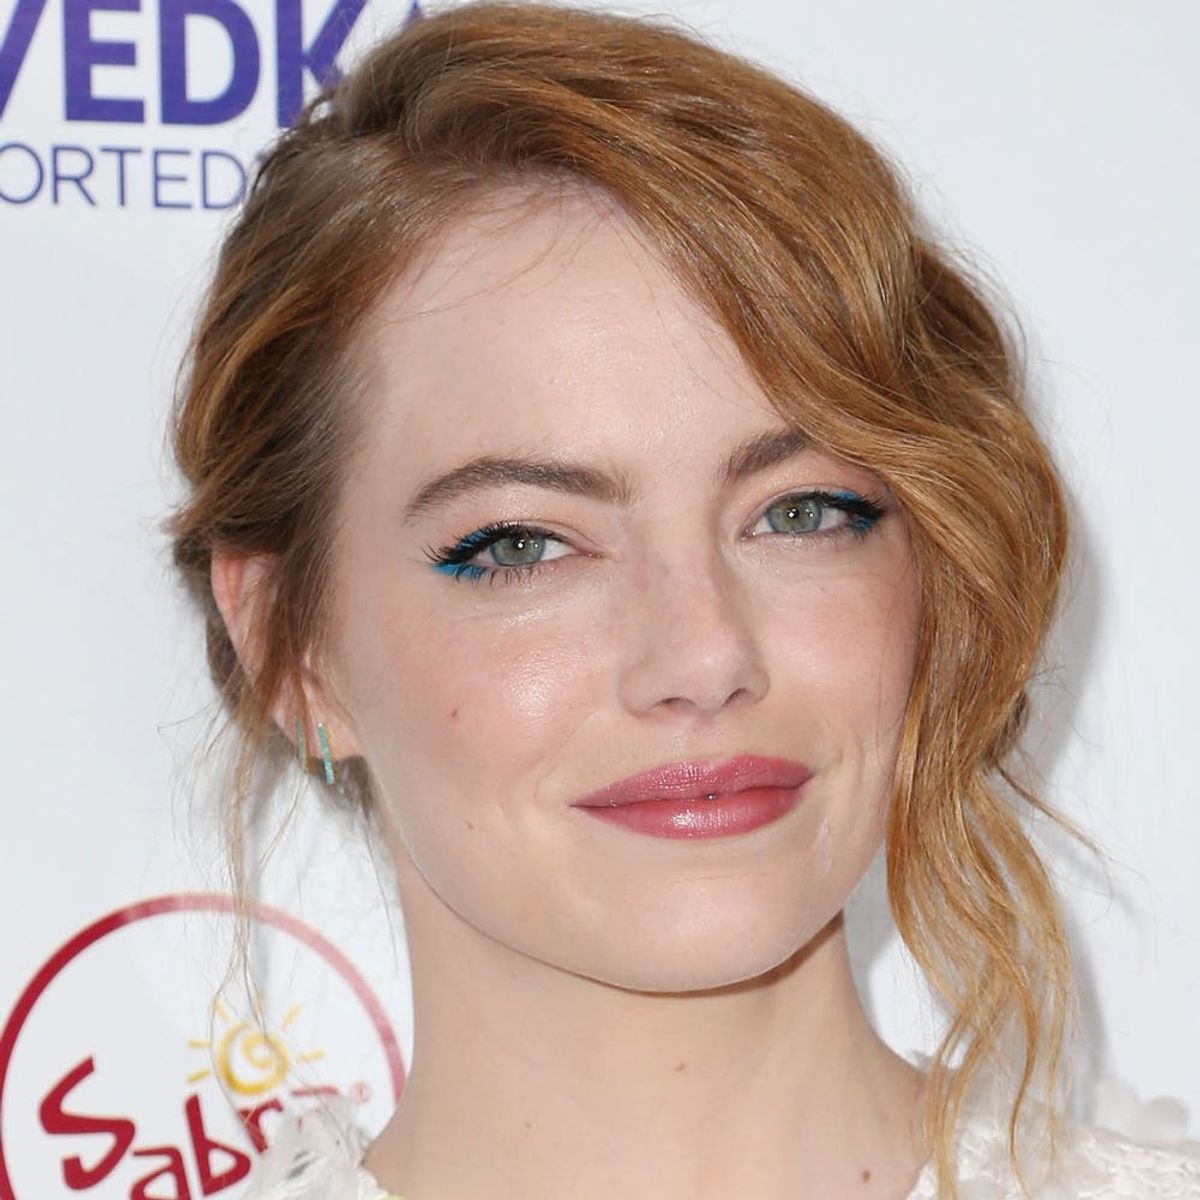 Emma Stone Might Be Playing One of the Scariest Disney Villains of All Time